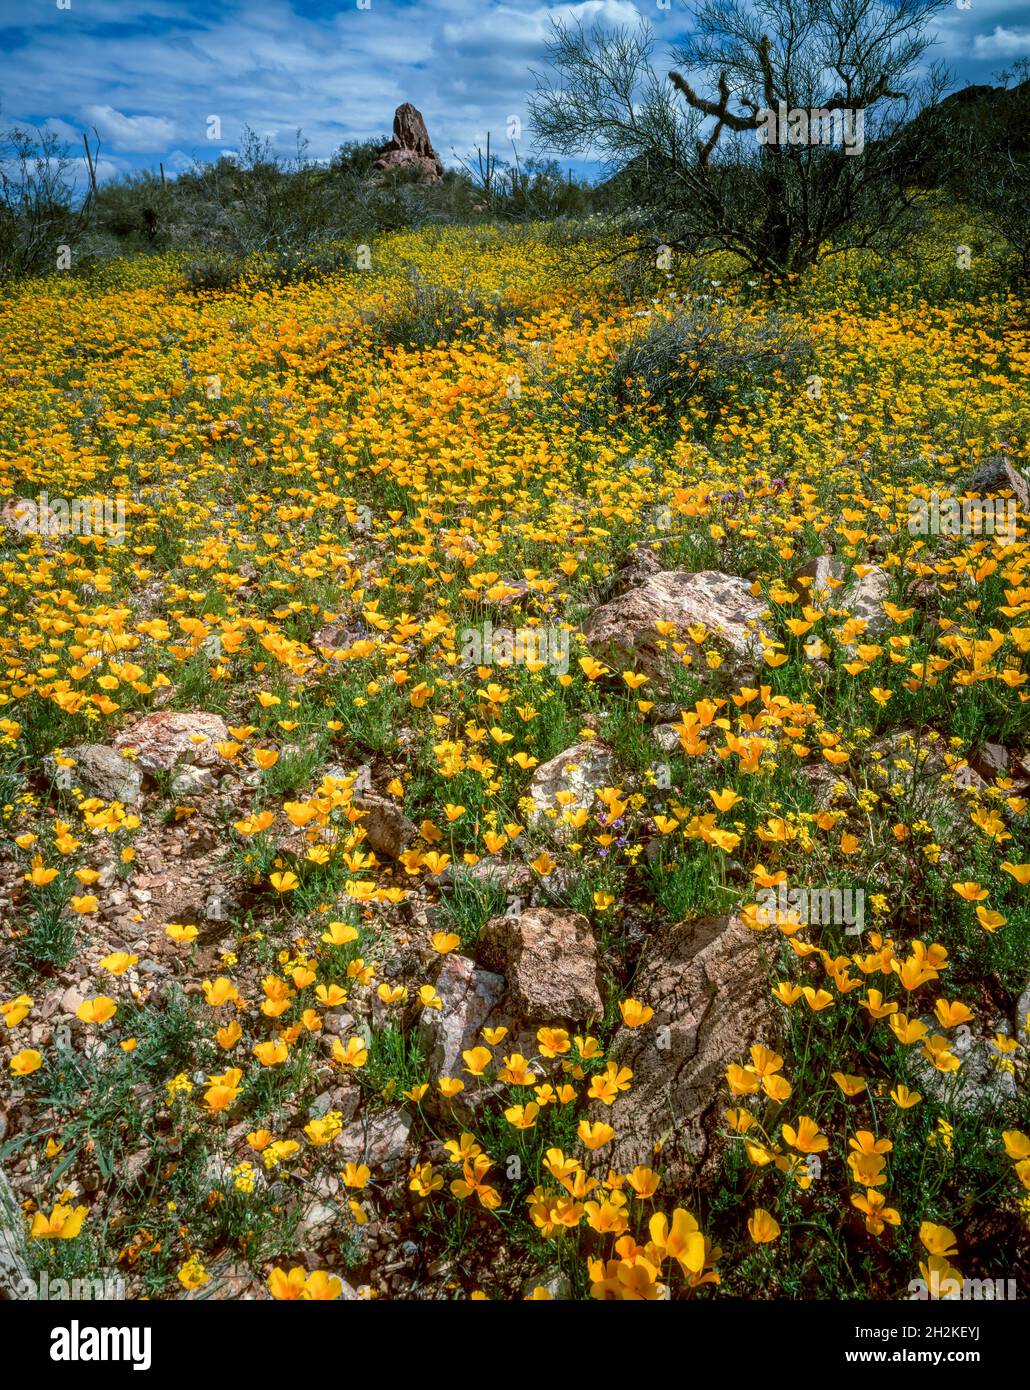 Poppies mexicaines, Argemone mexicana, Ajo Mountains, Organ Pipe Cactus National Monument, Arizona Banque D'Images